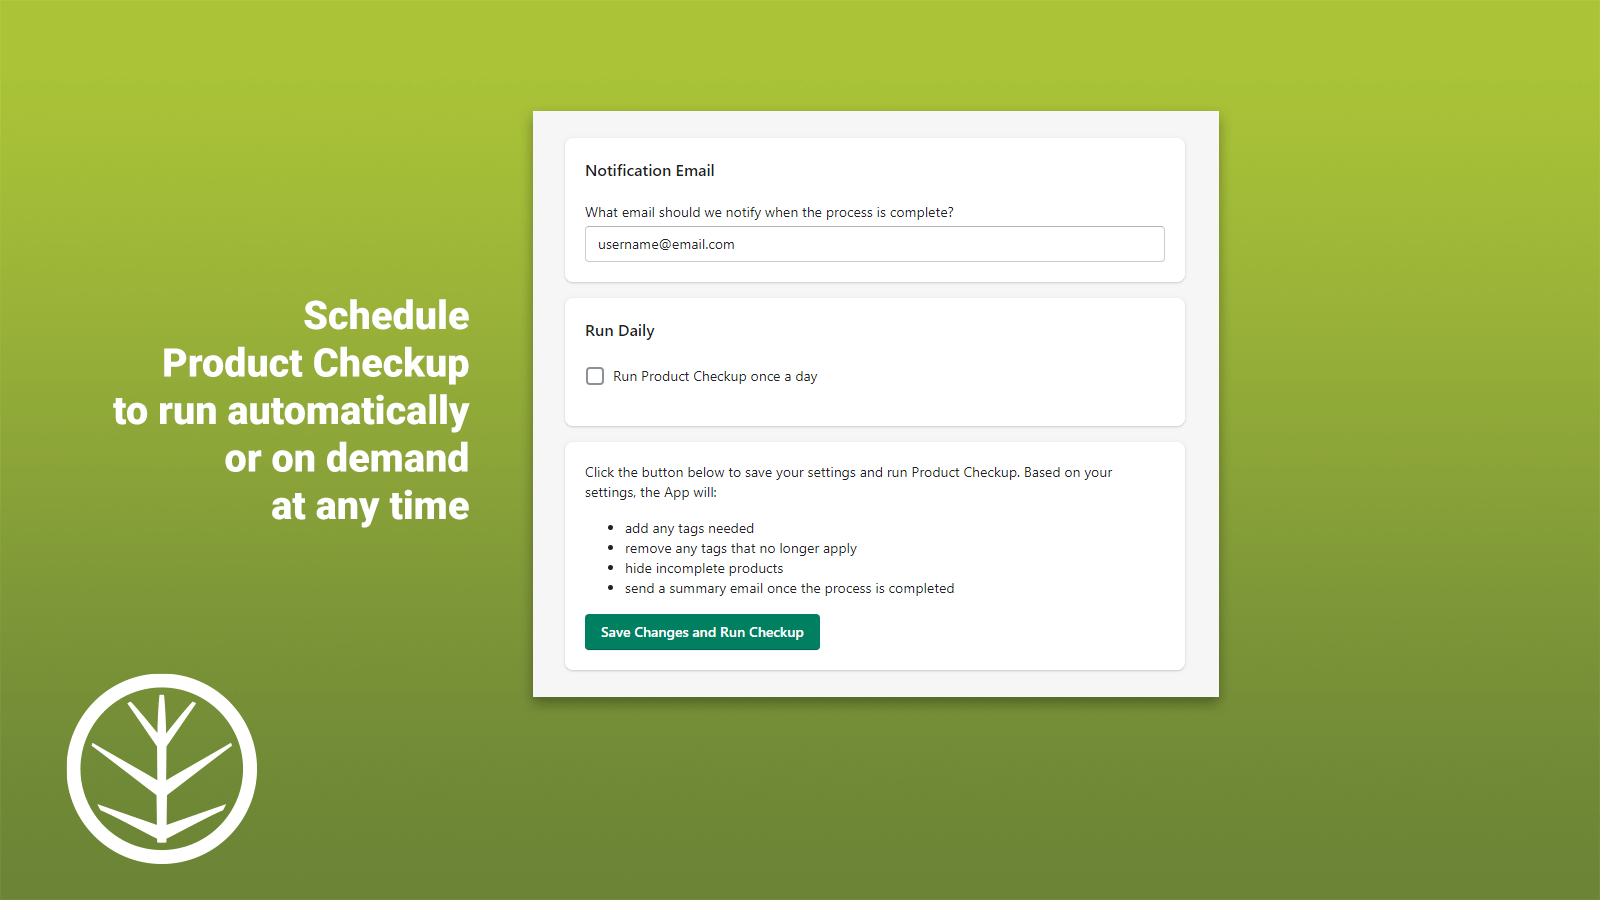 Schedule Product Checkup to run automatically or run on demand